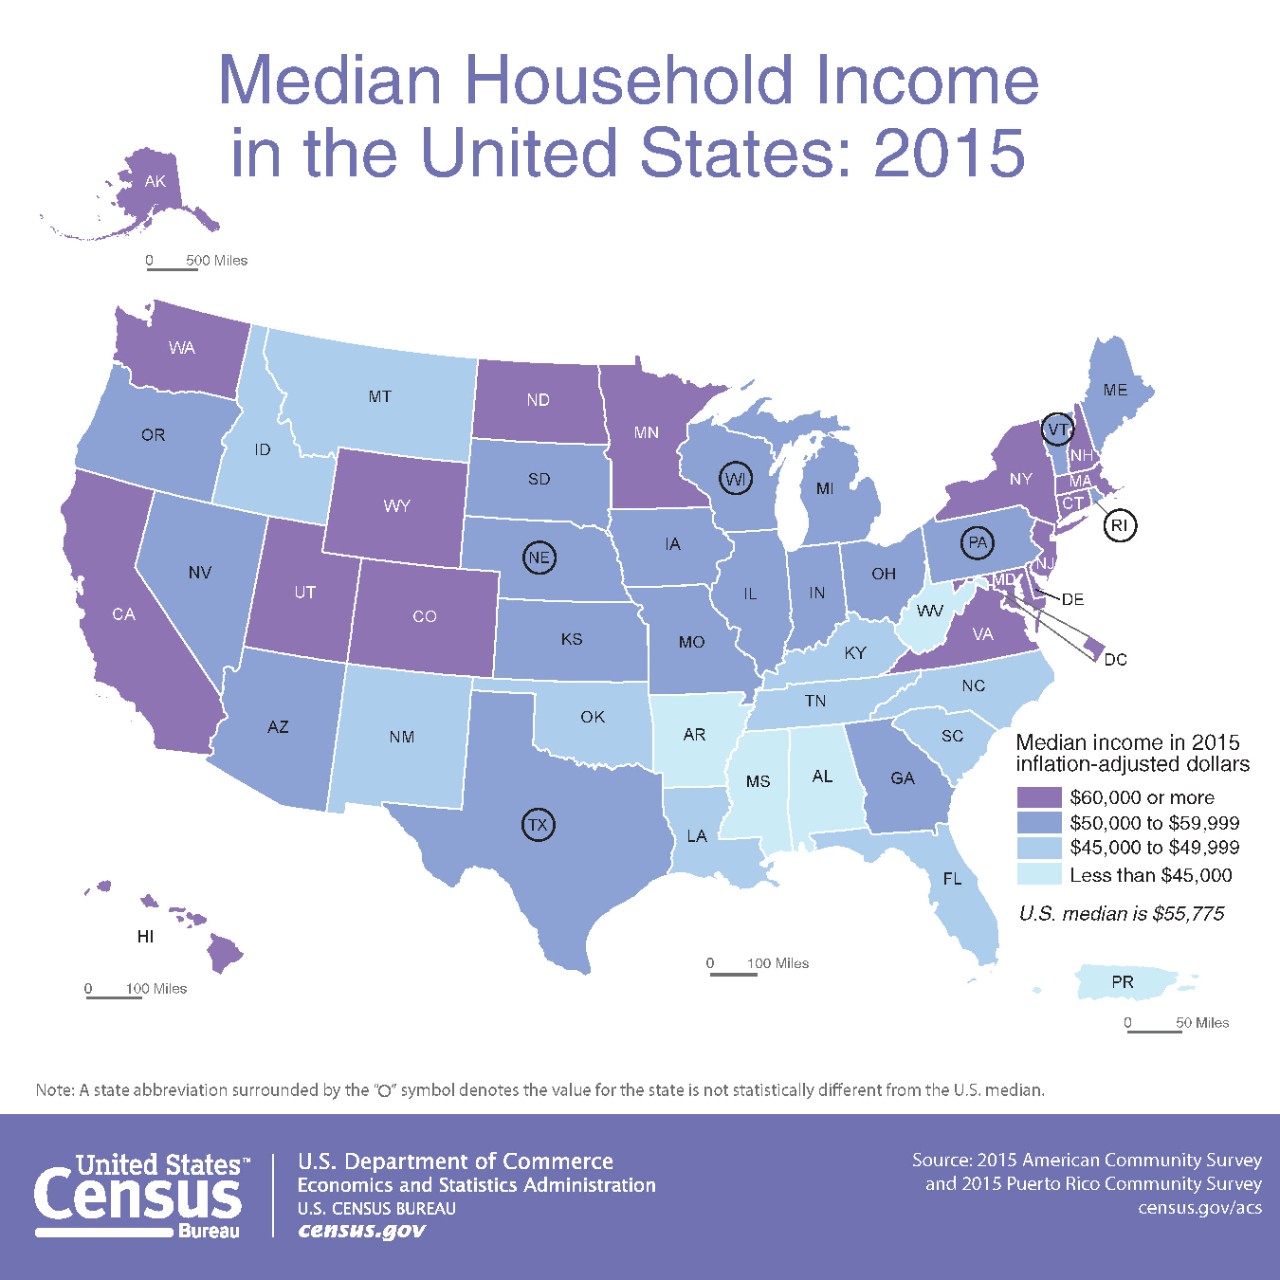 Median Household Income in the United States: 2015